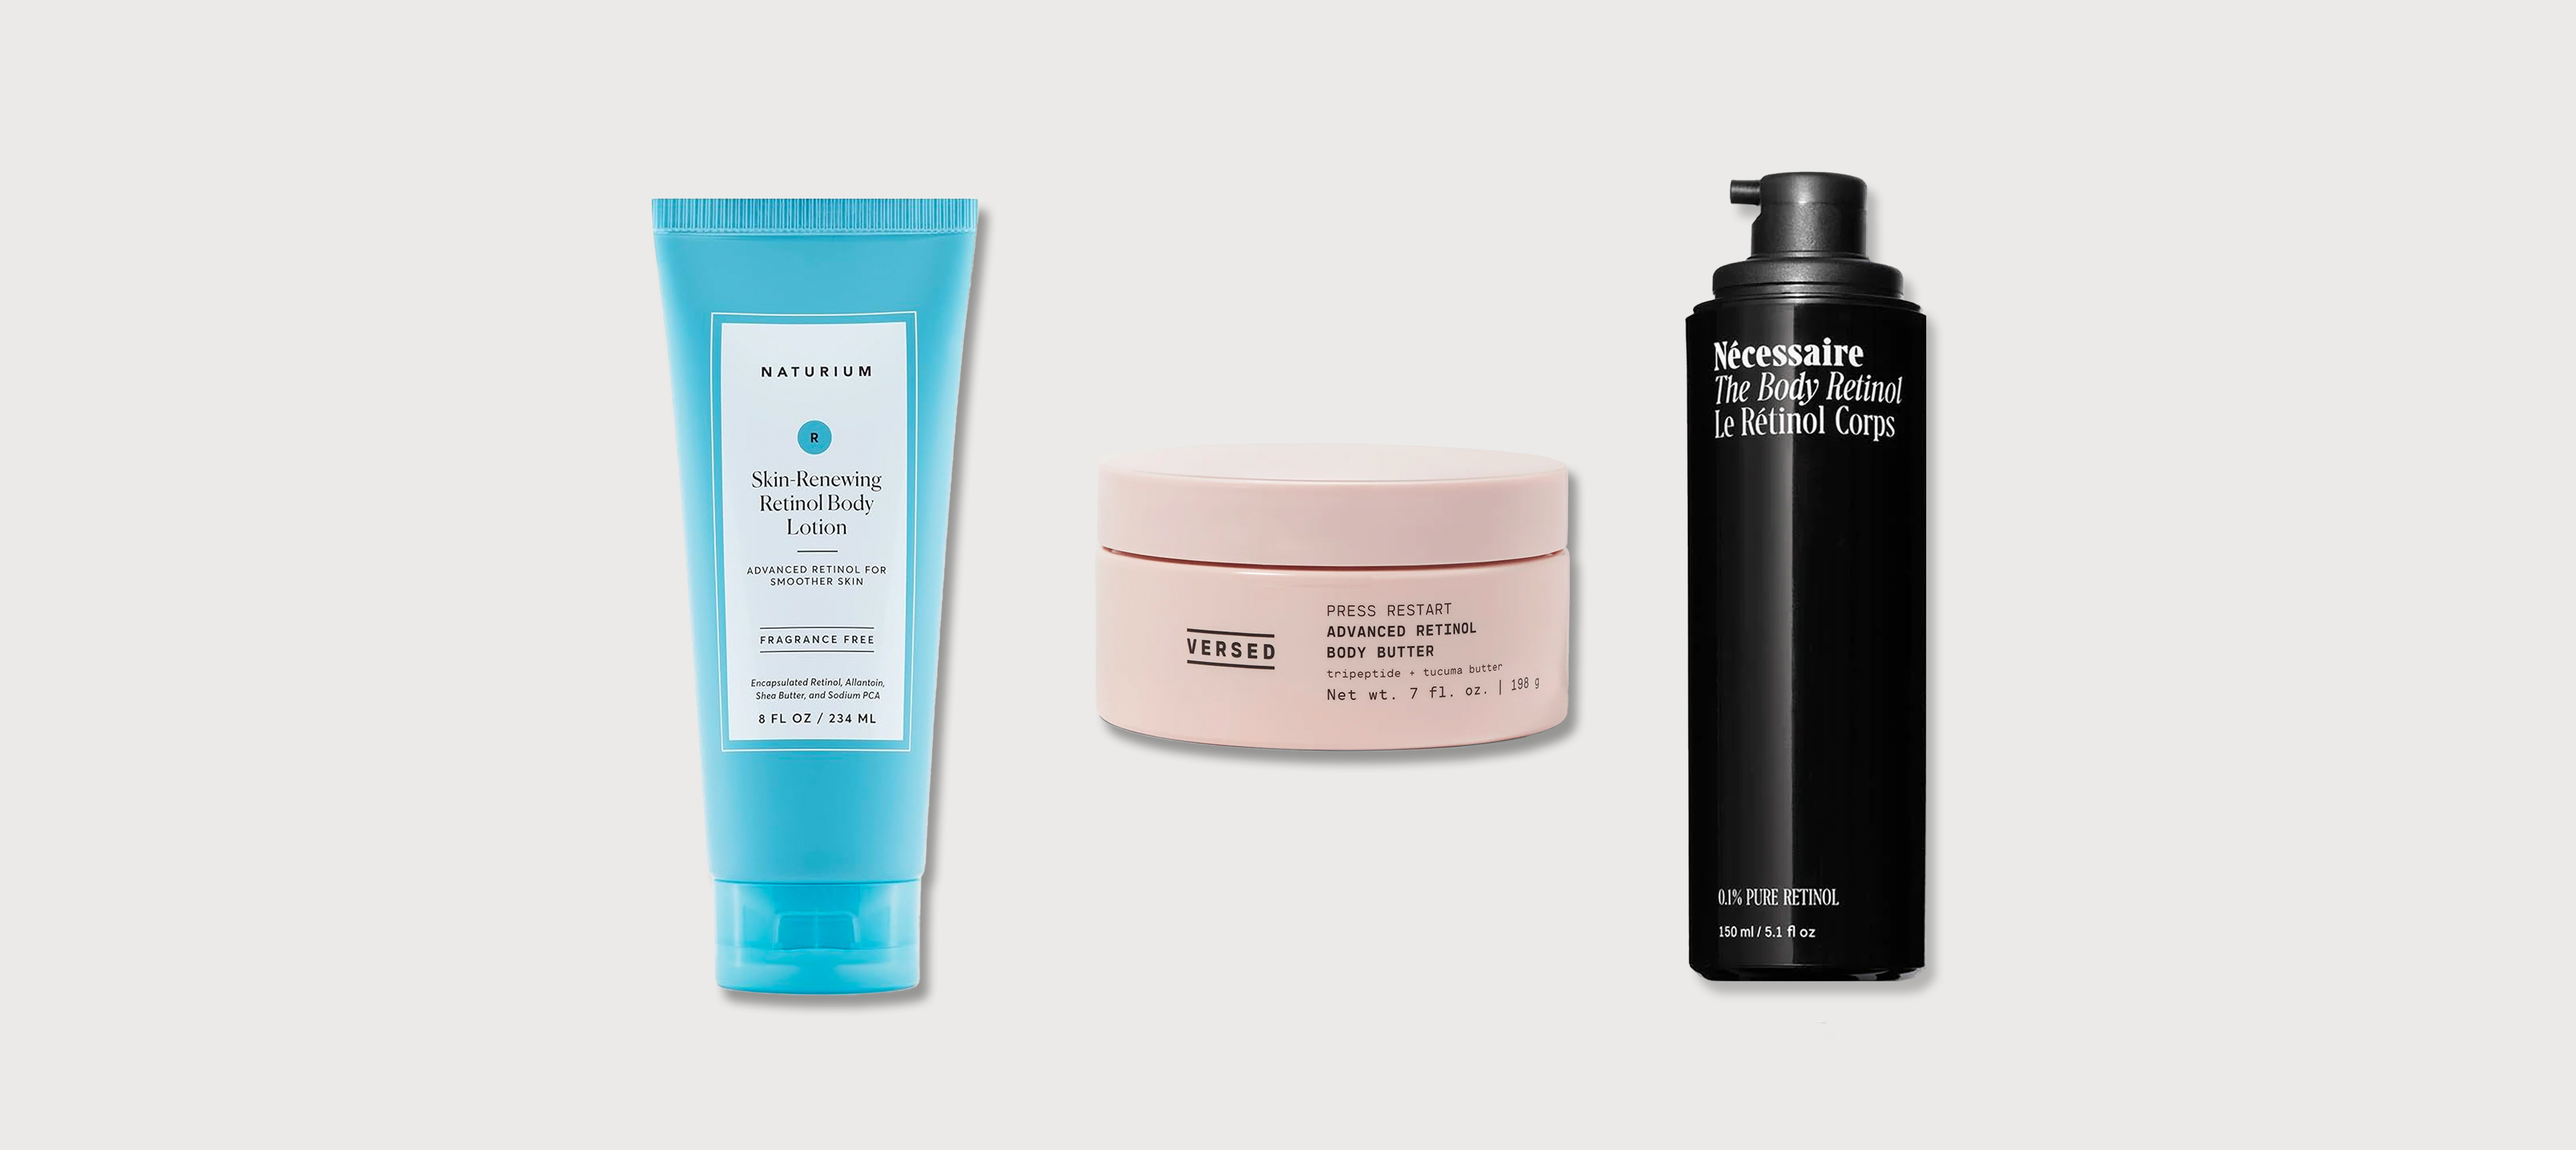 22 Retinol Body Treatments for Smoother, Firmer-Looking Skin featured image